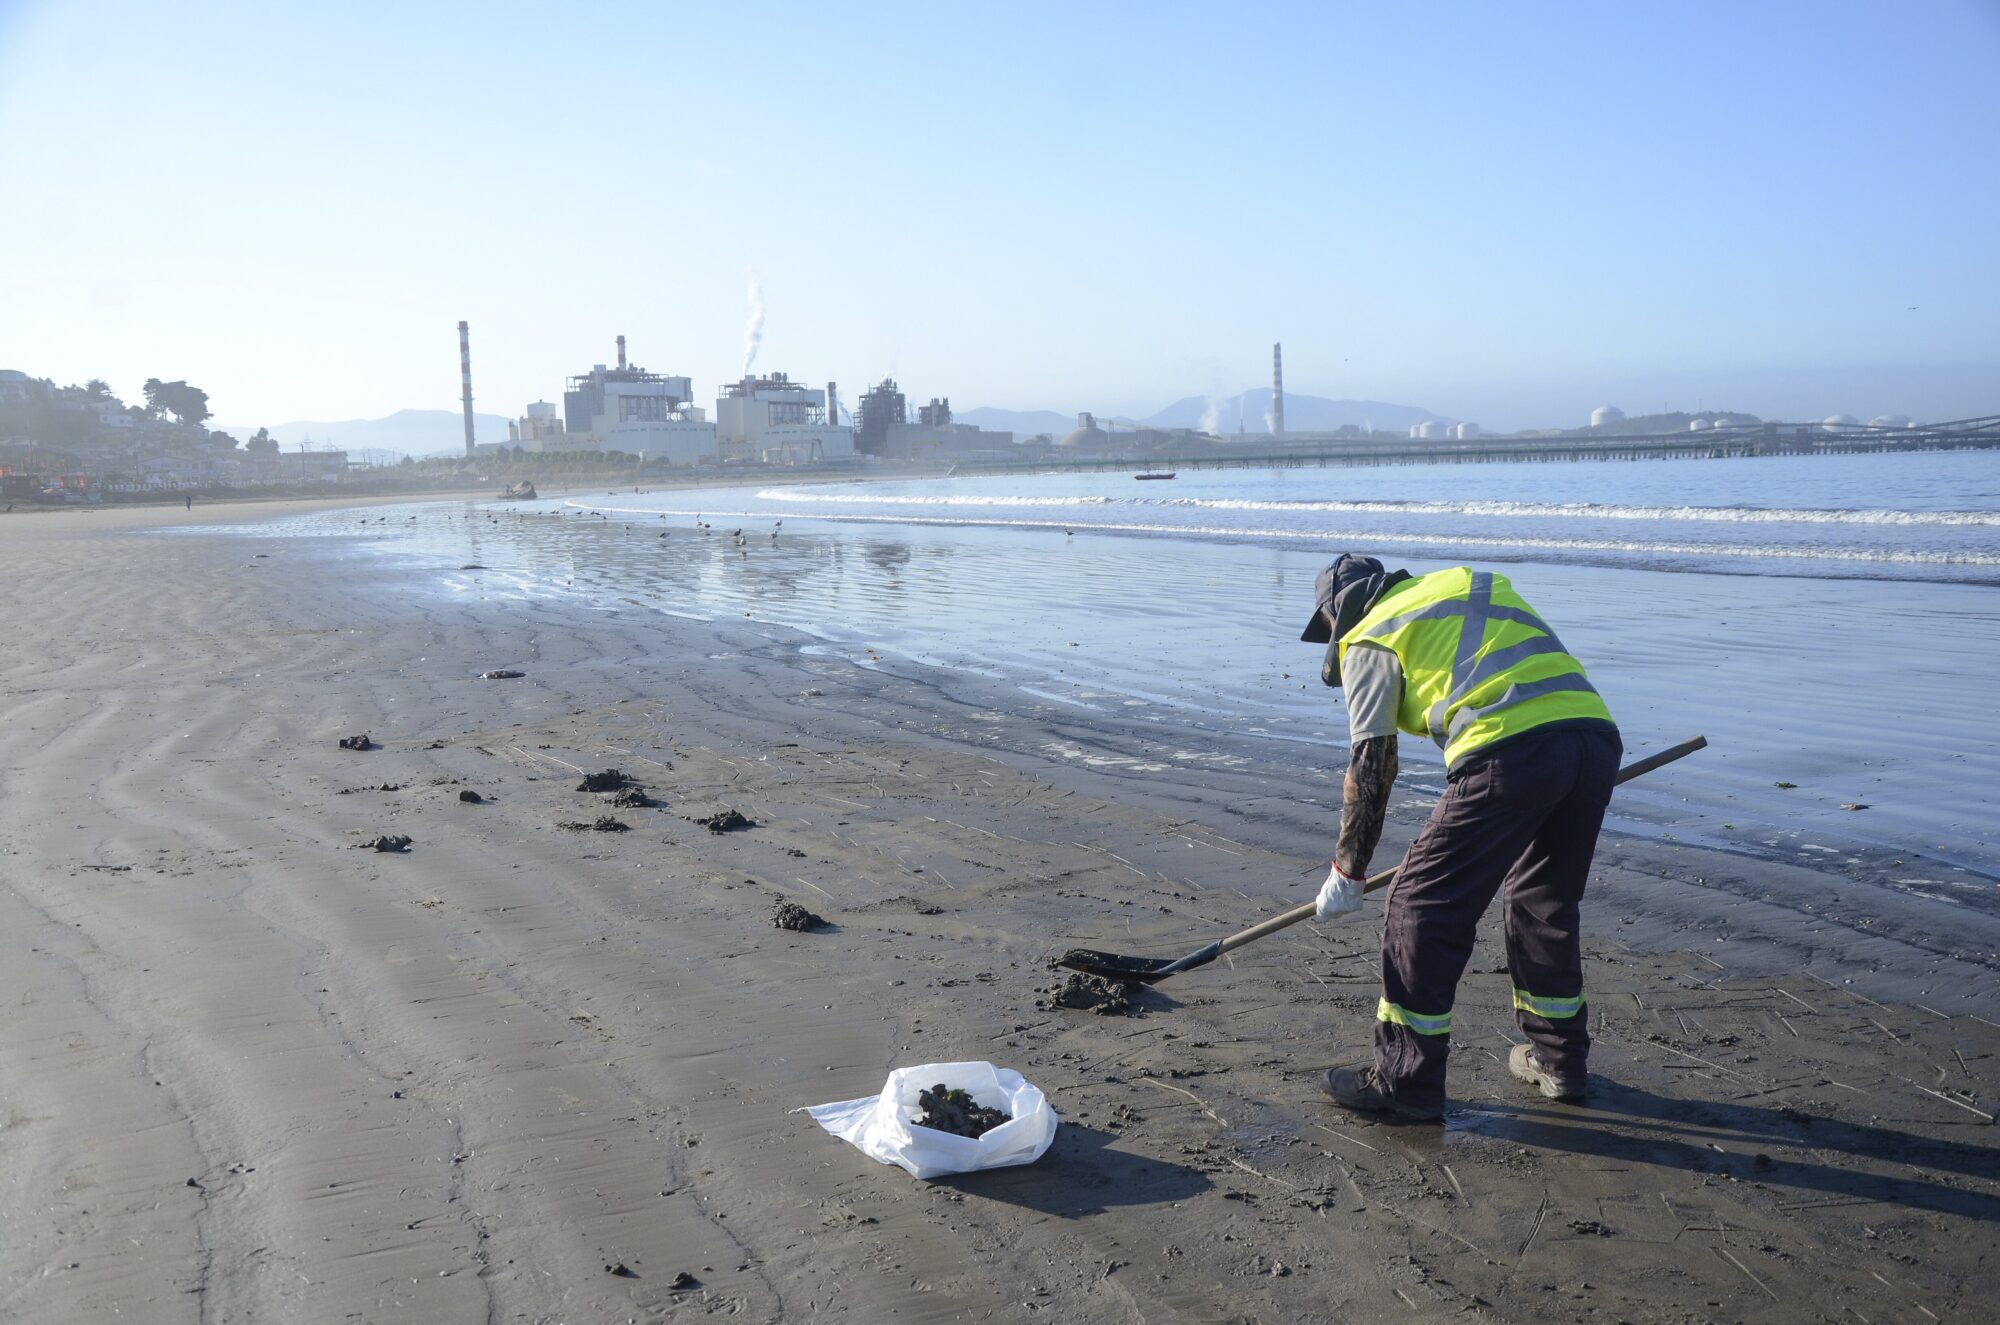 <p>A clean-up crew called in by AES Gener, owner of the coal-fired power plants operating in Quintero and Puchuncaví, regularly cleans the coal from the beach (Image: Saul Mansilla)</p>